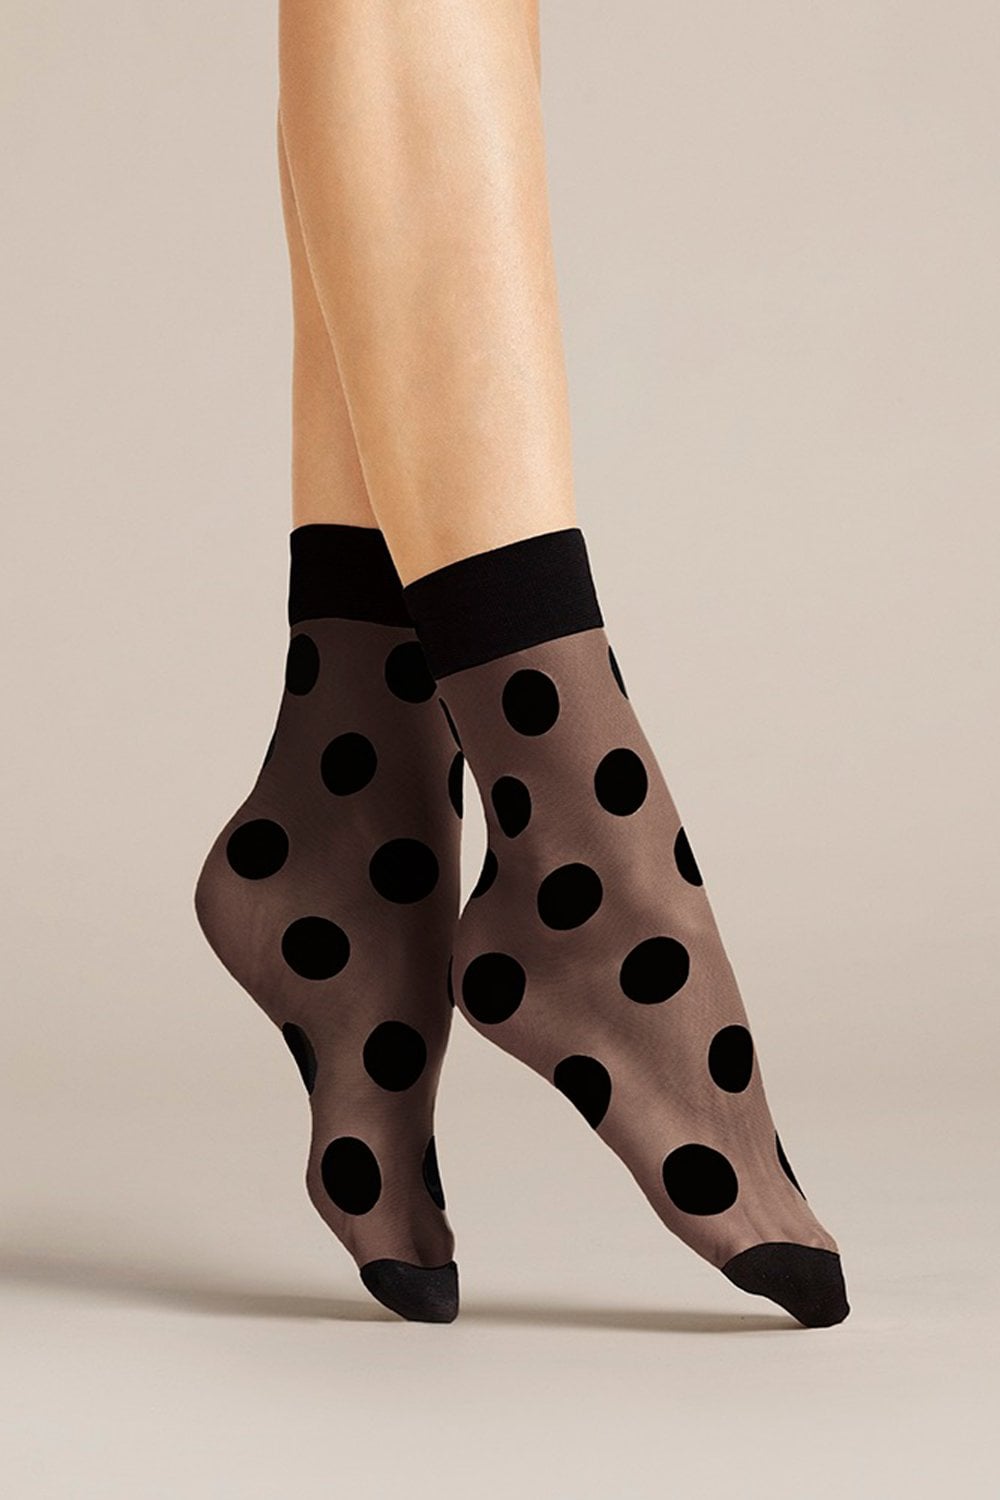 Fiore G 1080 Virginia Sock - Sheer black fashion ankle socks with a woven opaque polka dot pattern, plain deep cuff and opaque toe.